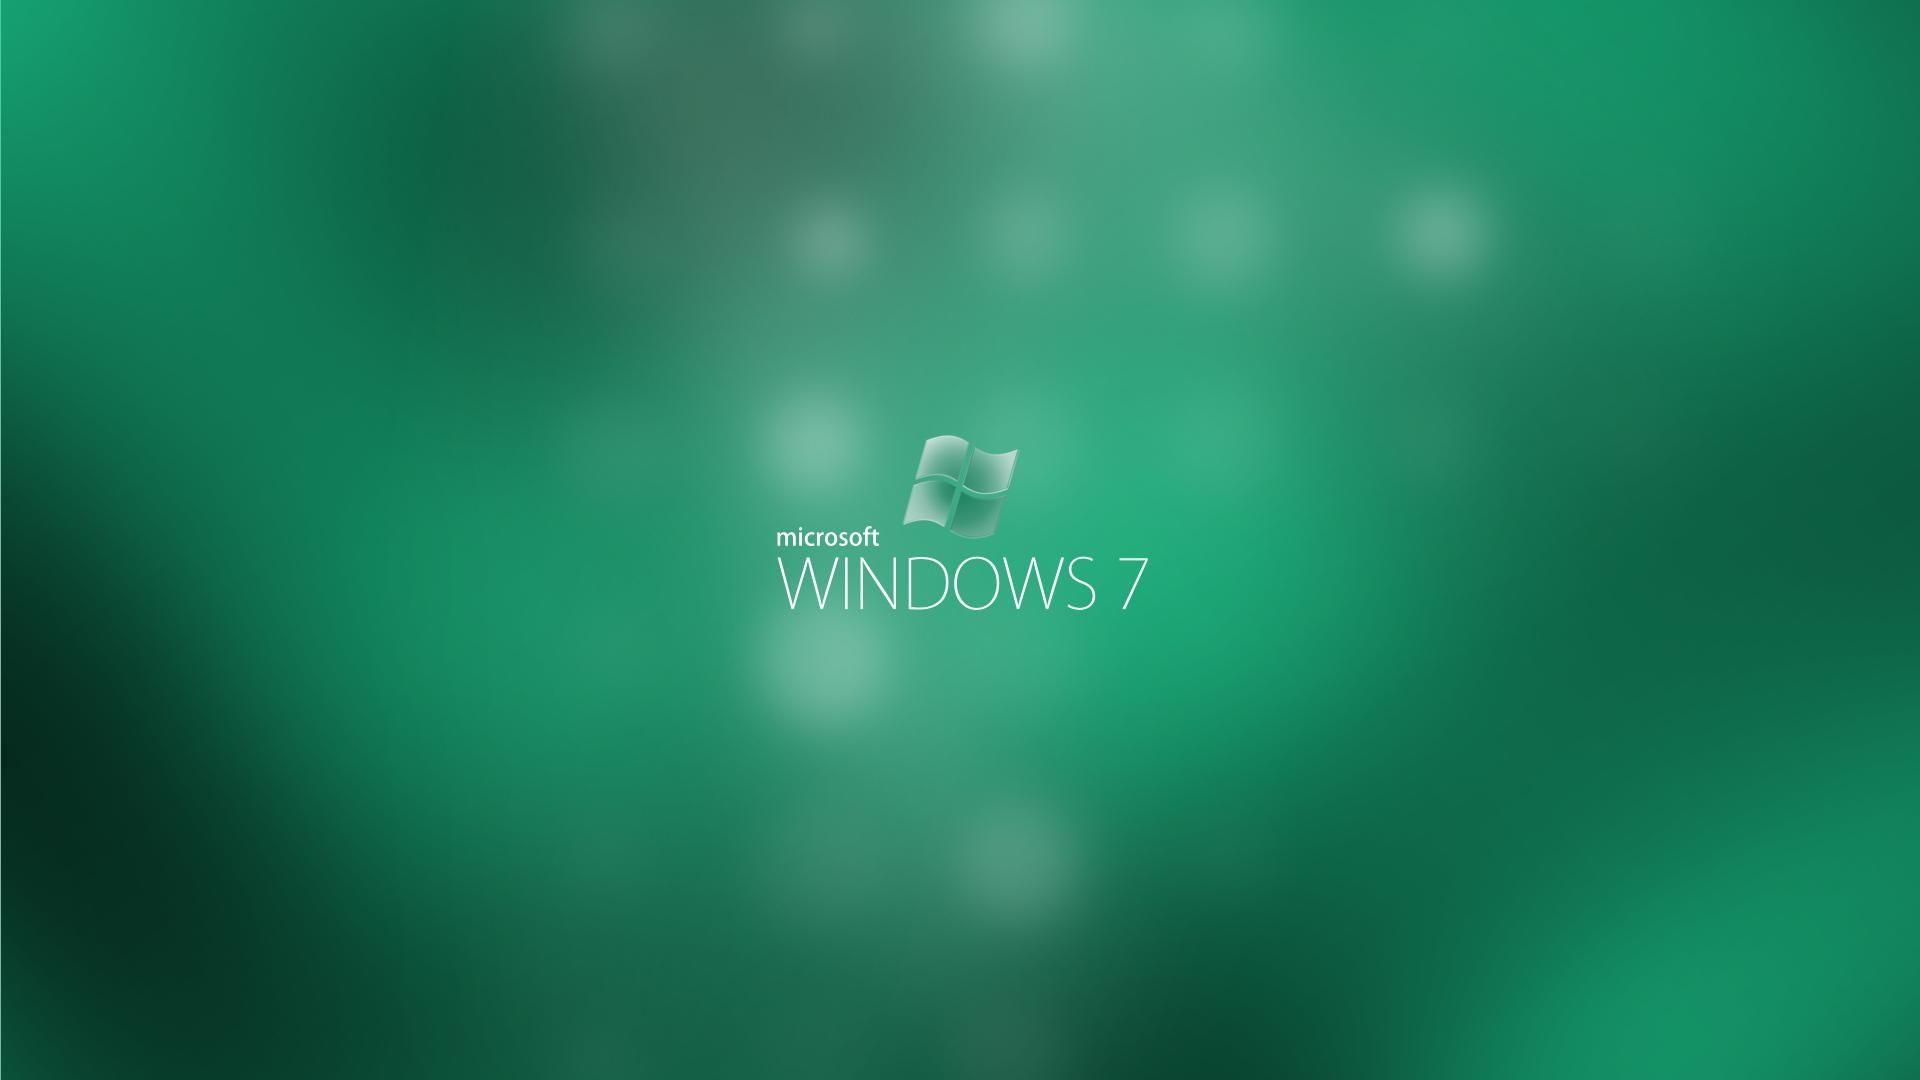 Microsoft Windows 7 Green Background Widescreen and HD background